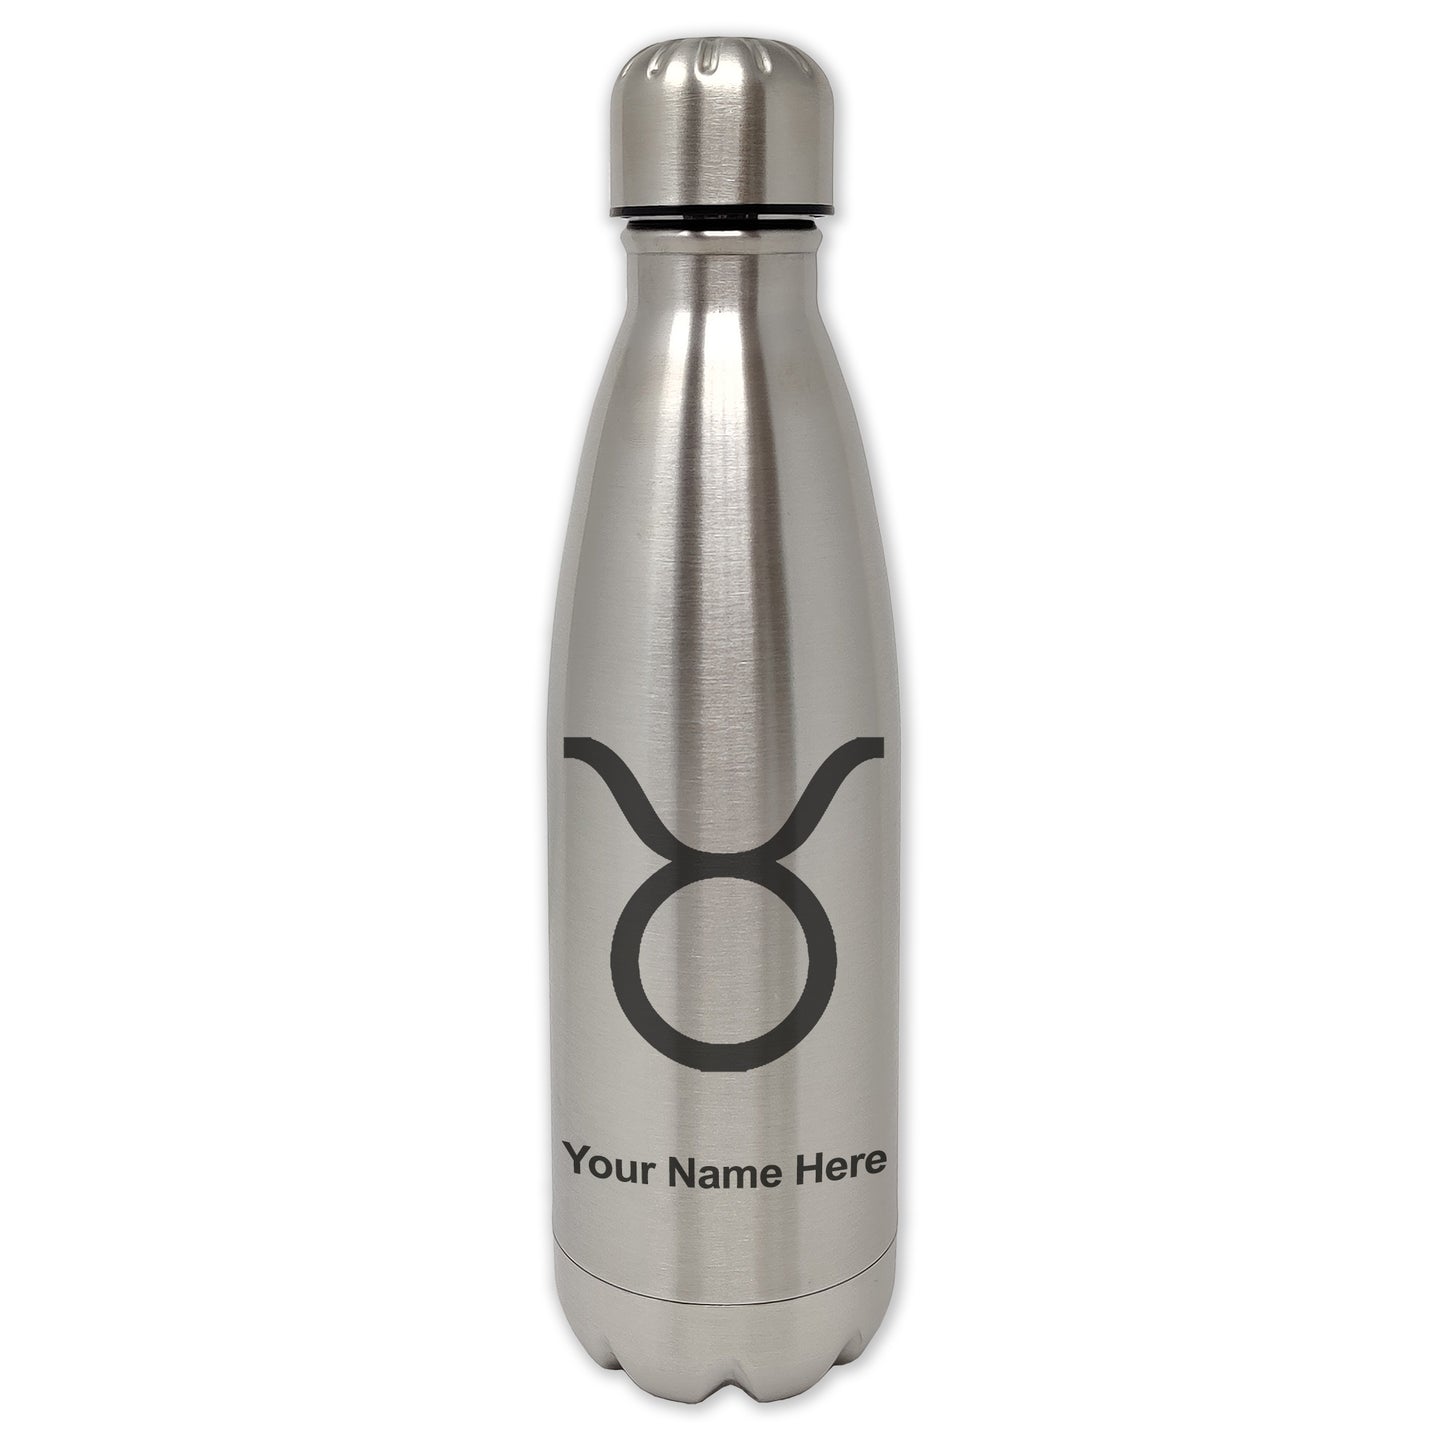 LaserGram Double Wall Water Bottle, Zodiac Sign Taurus, Personalized Engraving Included